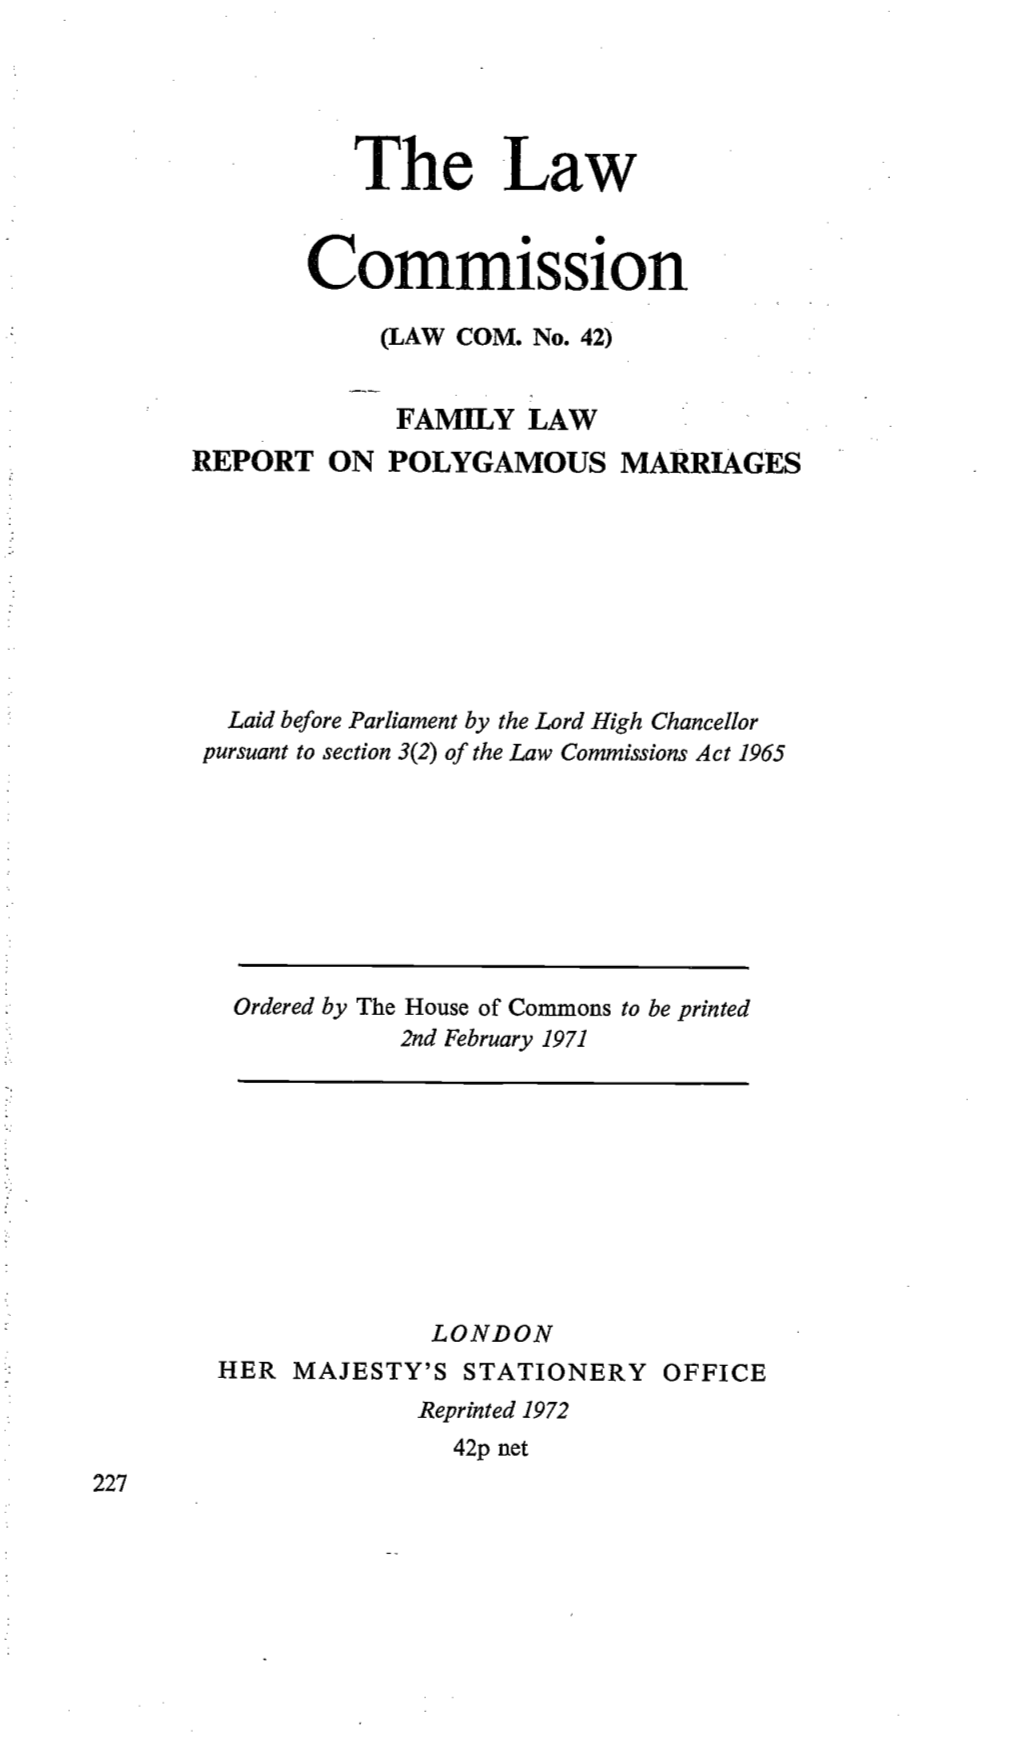 Family Law: Polygamous Marriages Report